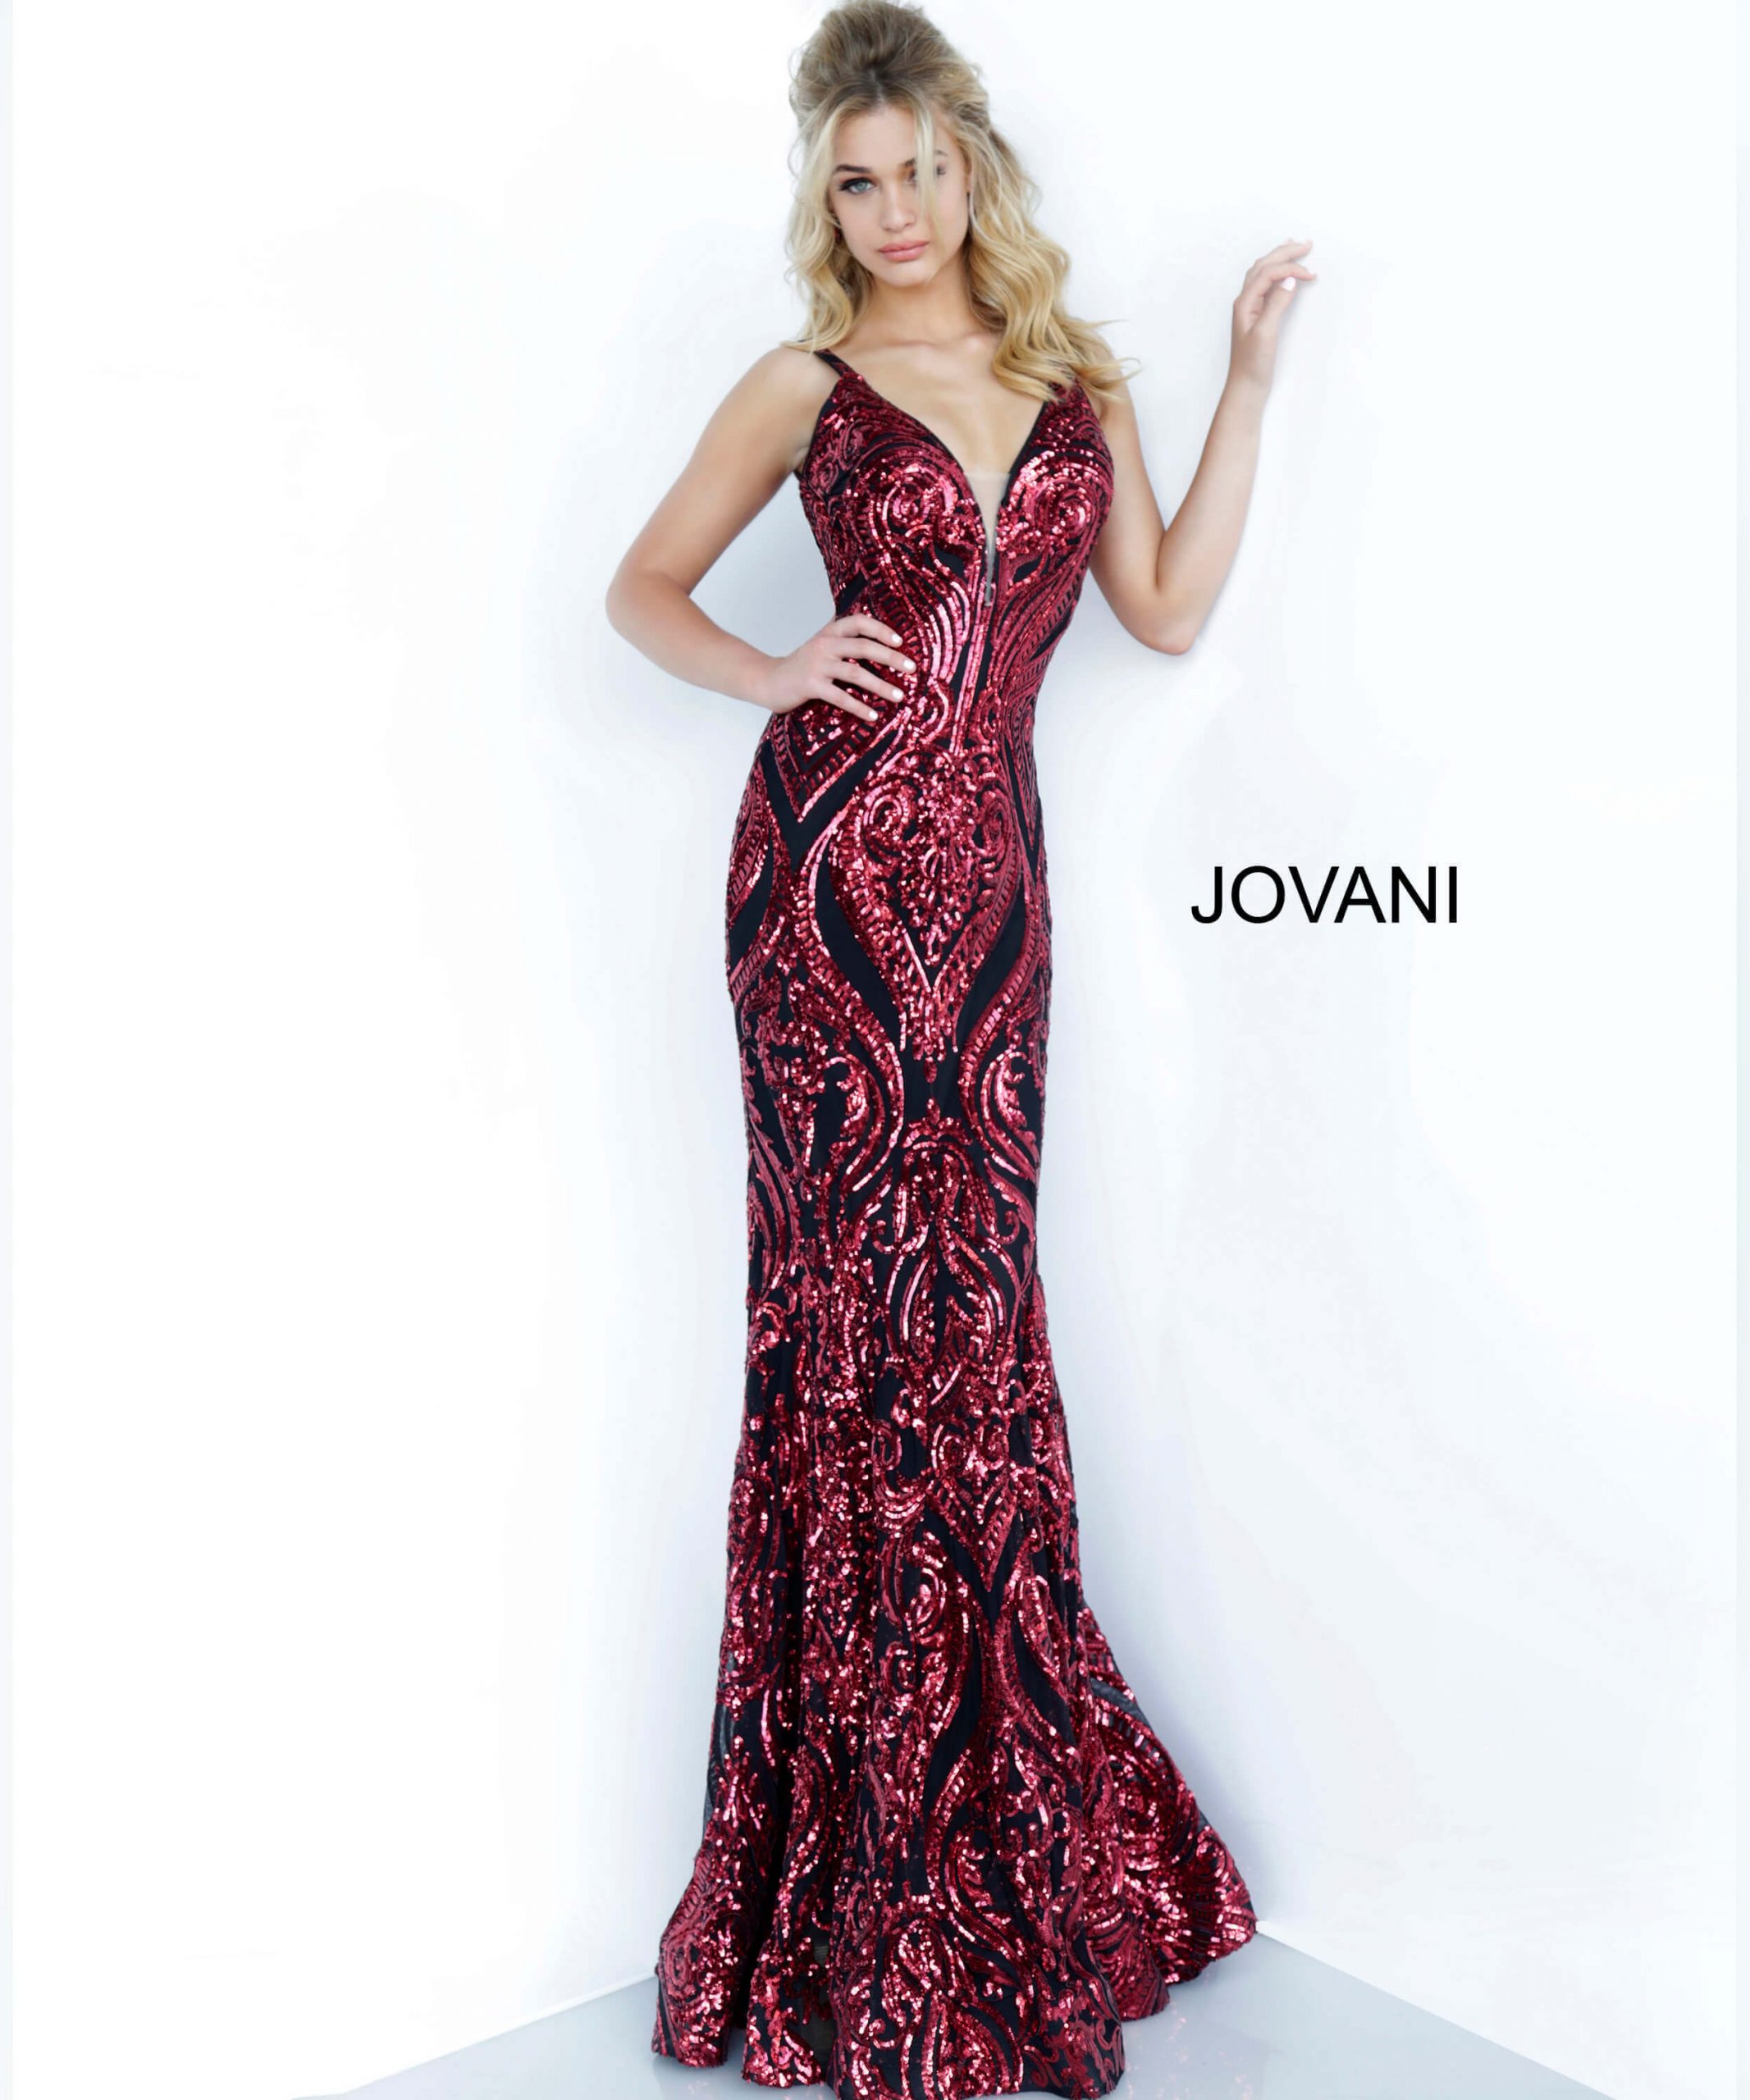 Popular Styles and Colors of Jovani Dresses